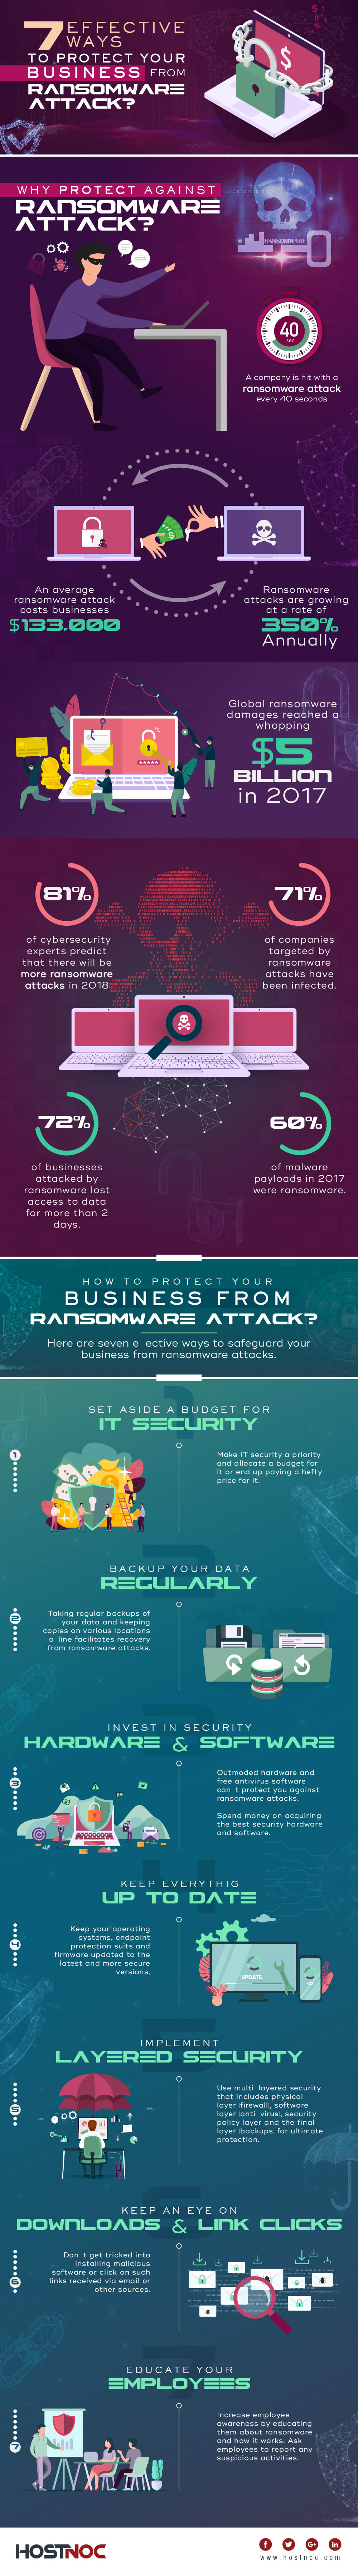 7 Effective Ways to Protect Your Business From Ransomware Attacks